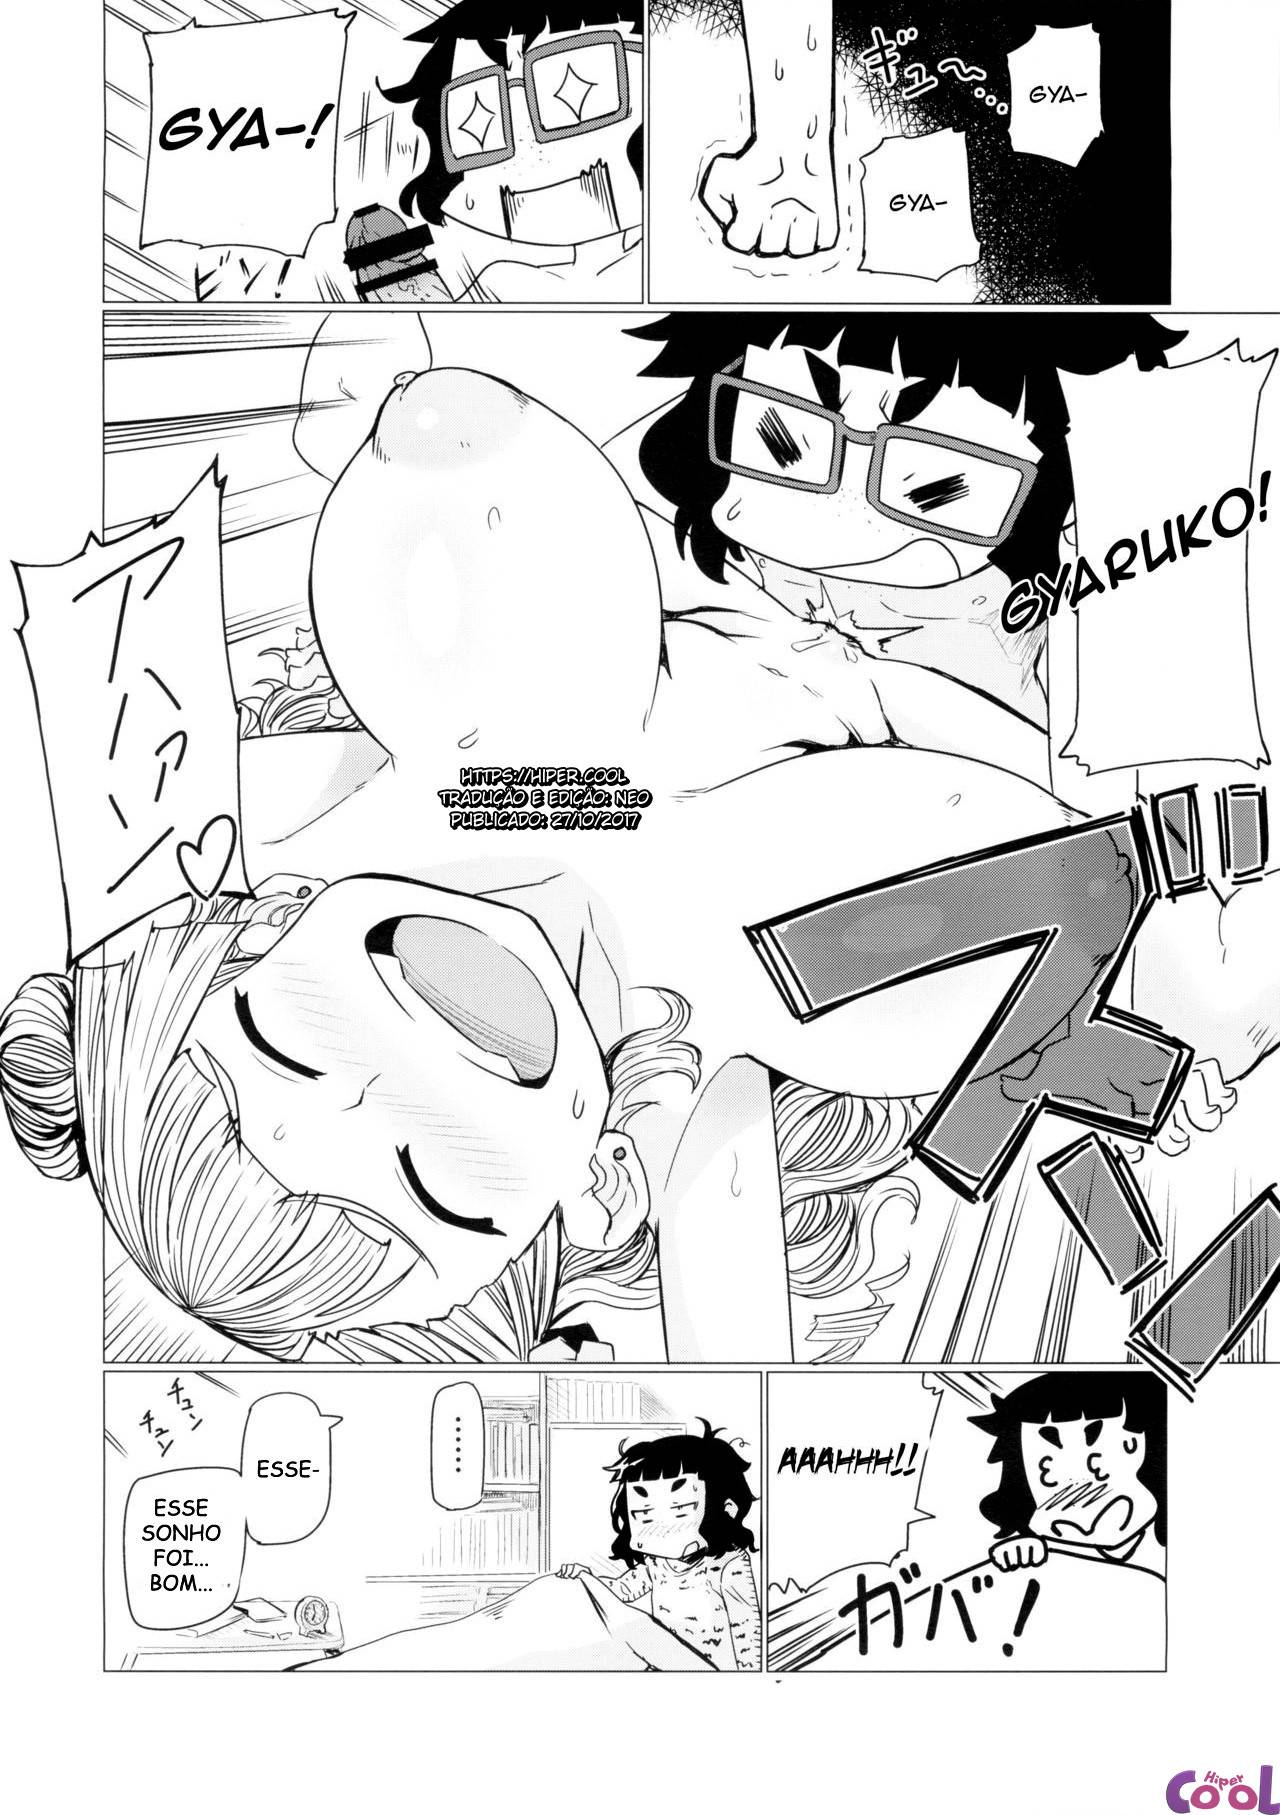 galko-ah---chapter-01-page-22.jpg